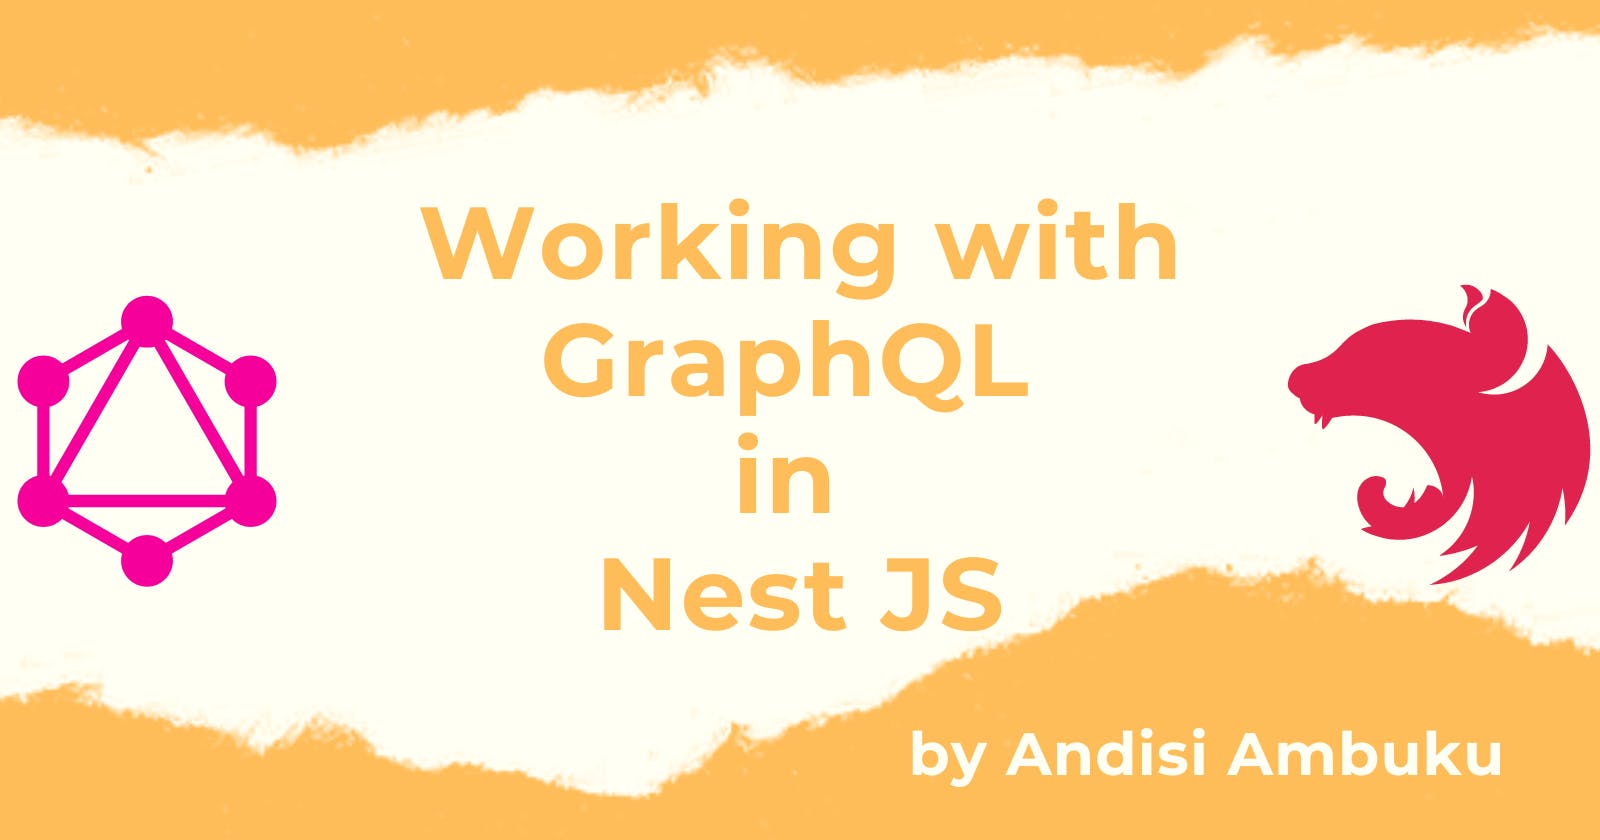 Working with GraphQL in Nest JS